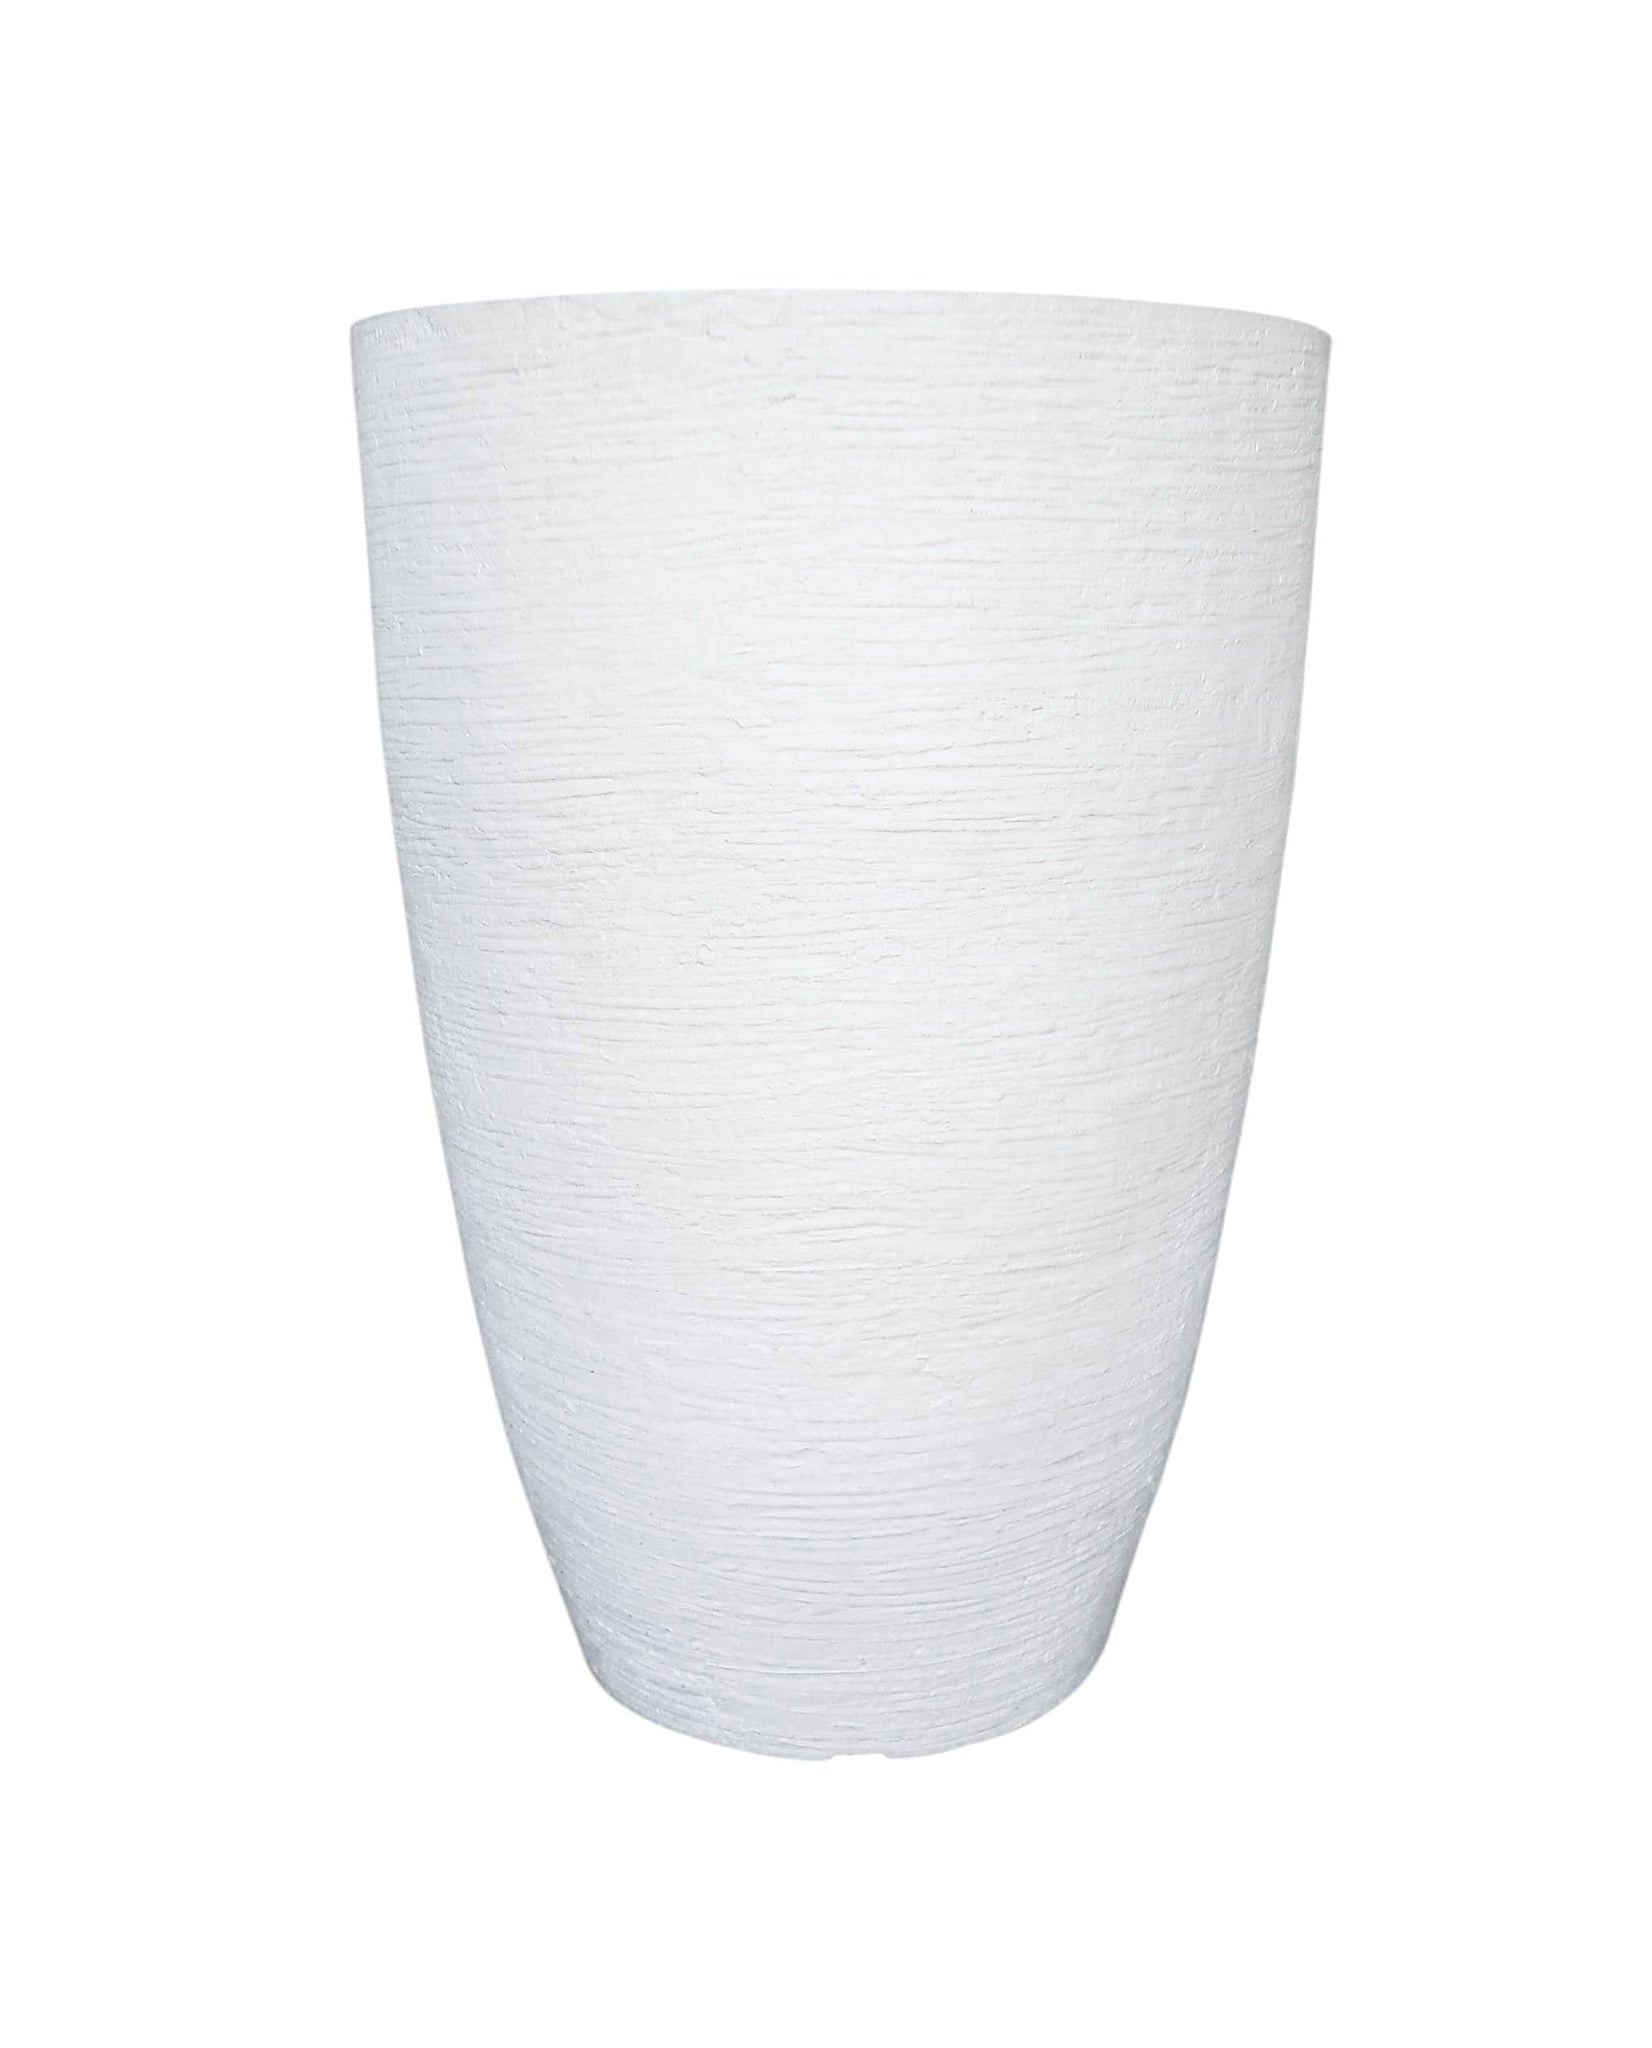 Large upright plant pot. Textured finish. Lightweight poly carbon. Modern and stylish.